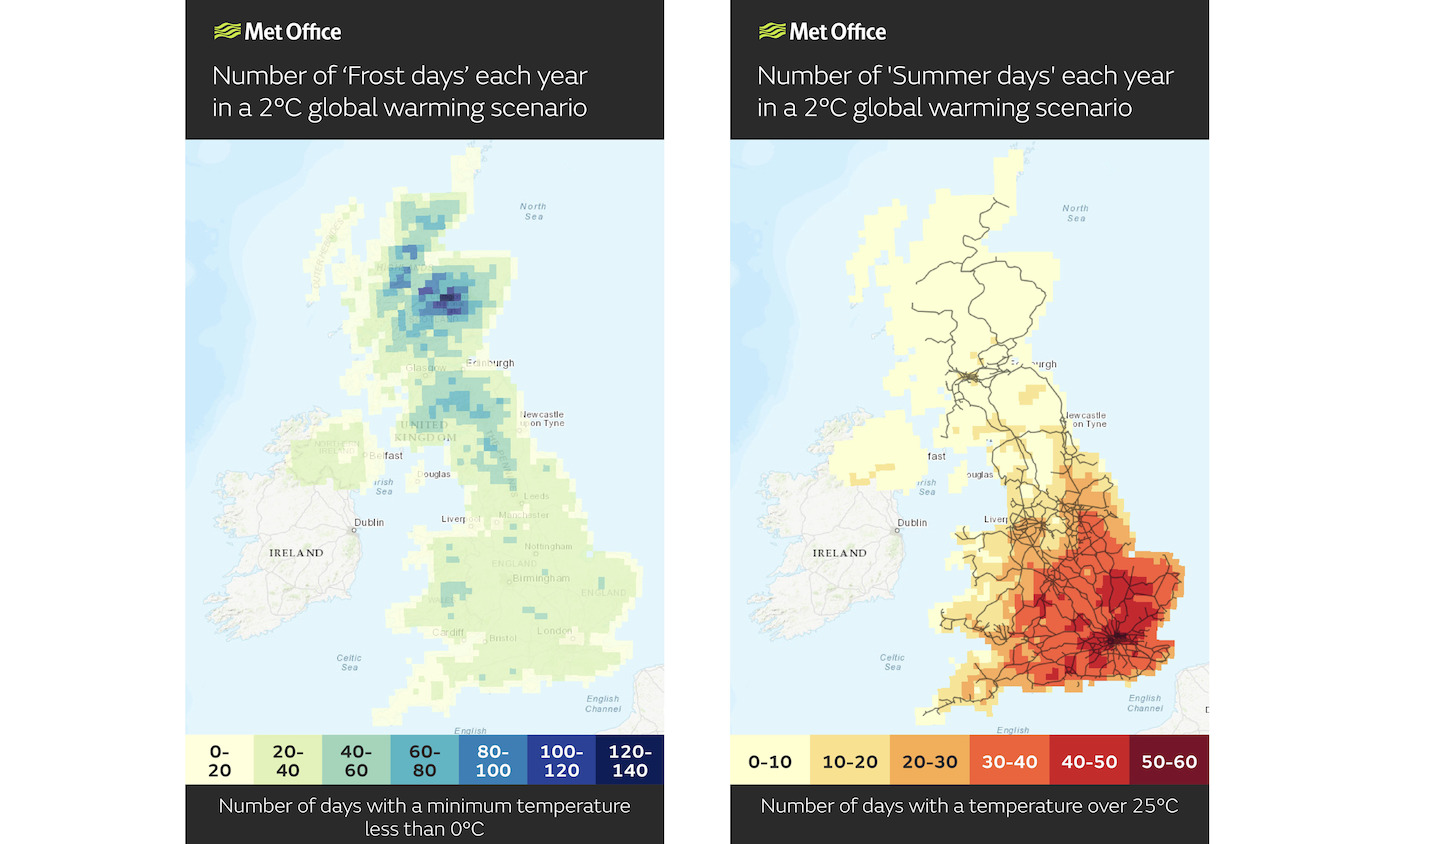 Screen grabs from the climate data portal - Met Office